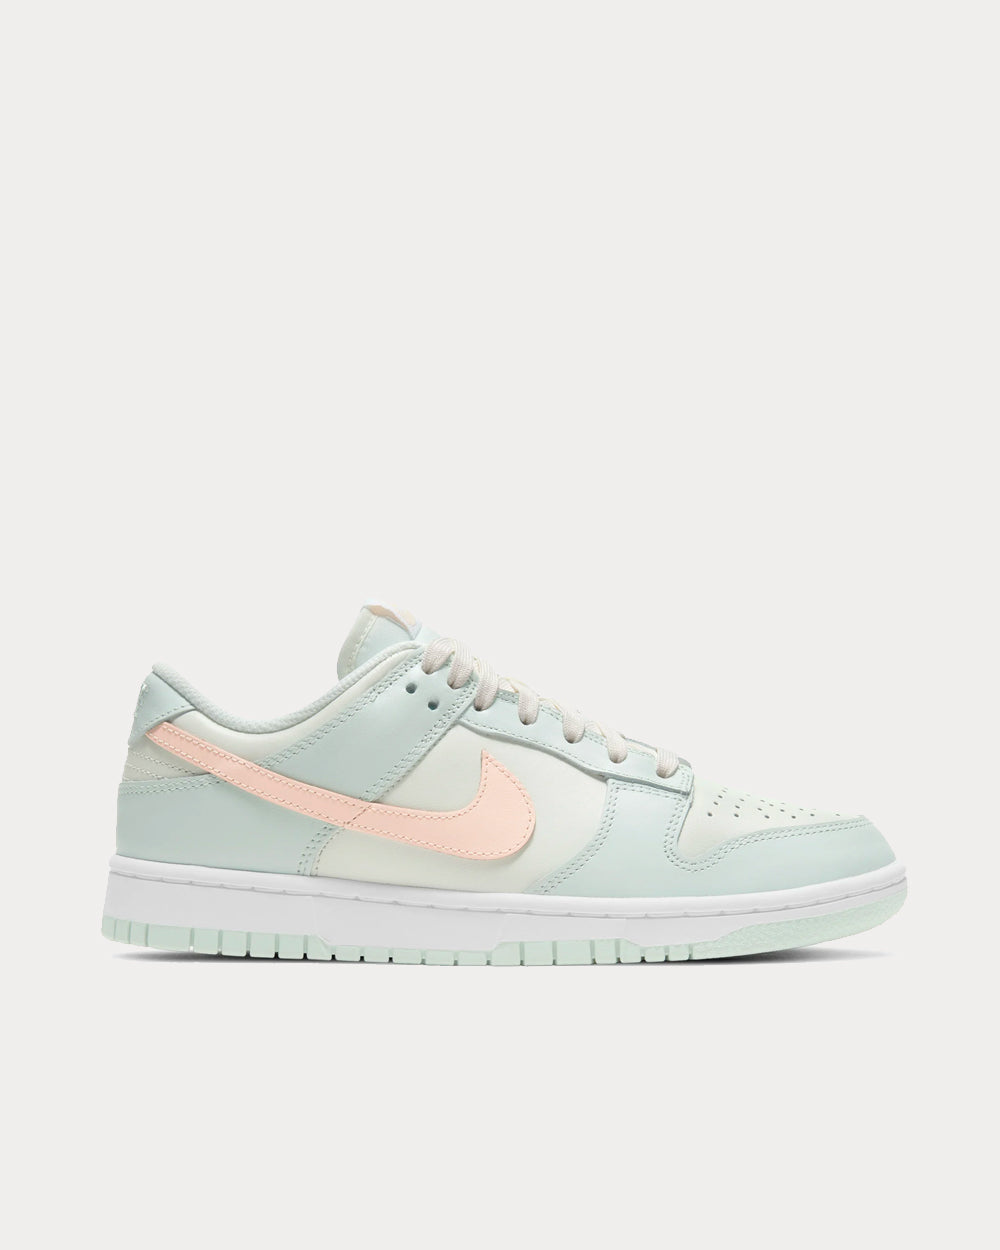 Nike Dunk Low Sail / Crimson Tint / Barely Green / White Low Top